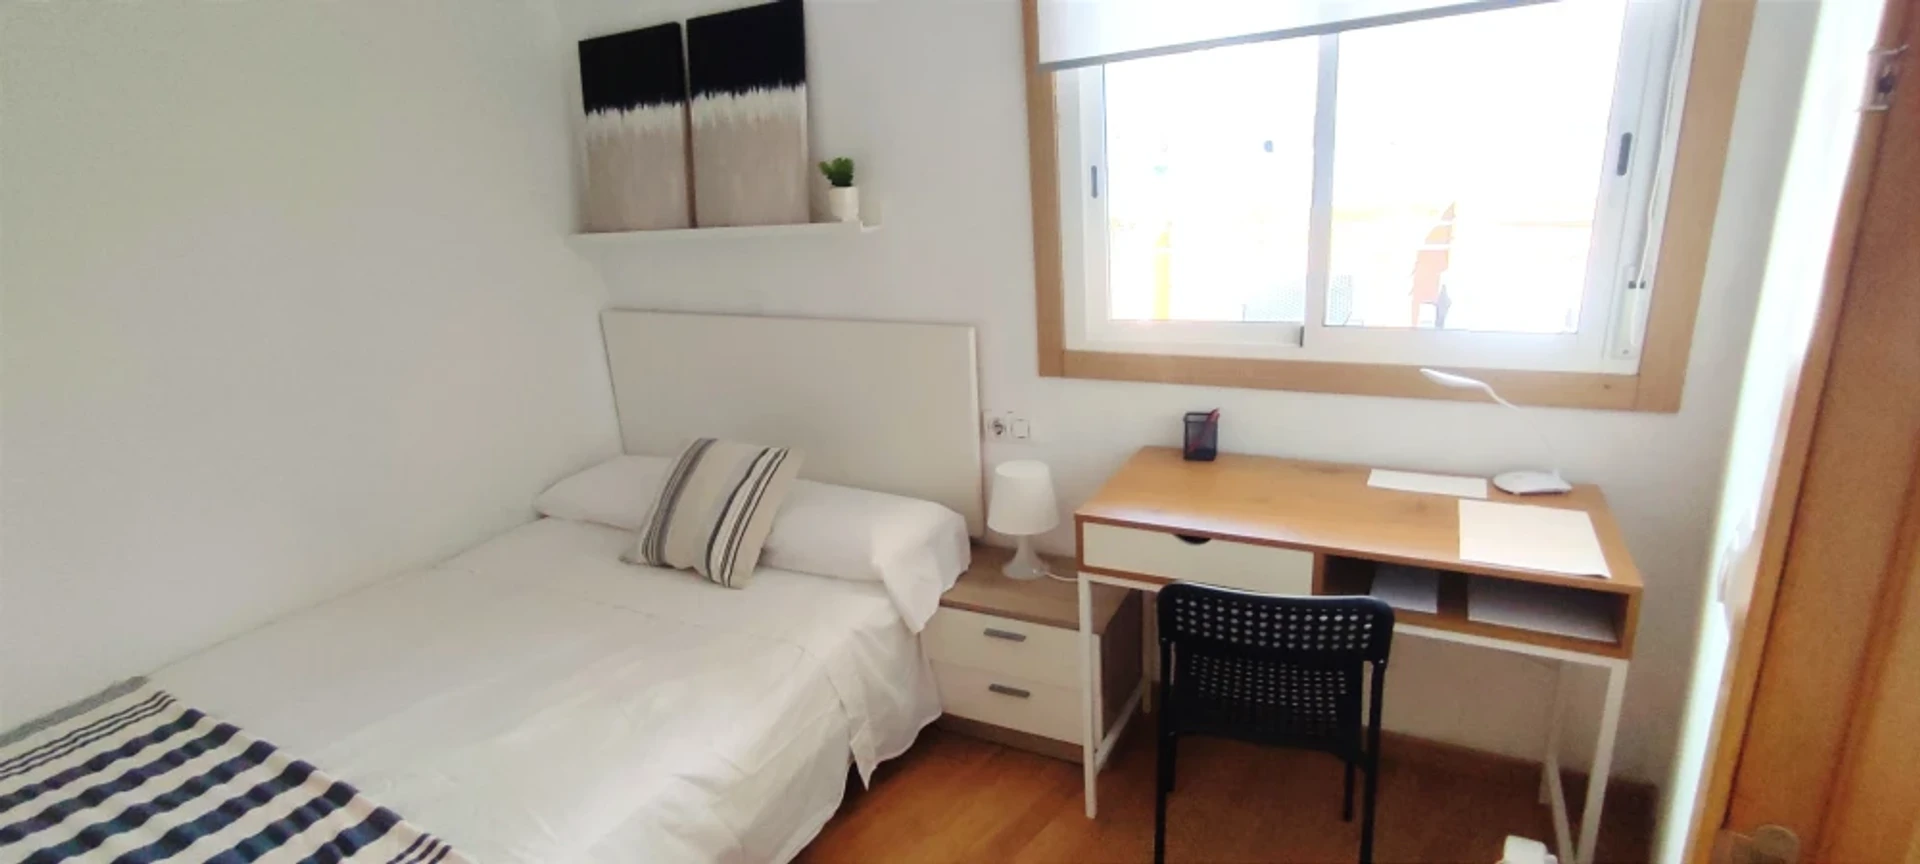 Room for rent in a shared flat in vigo